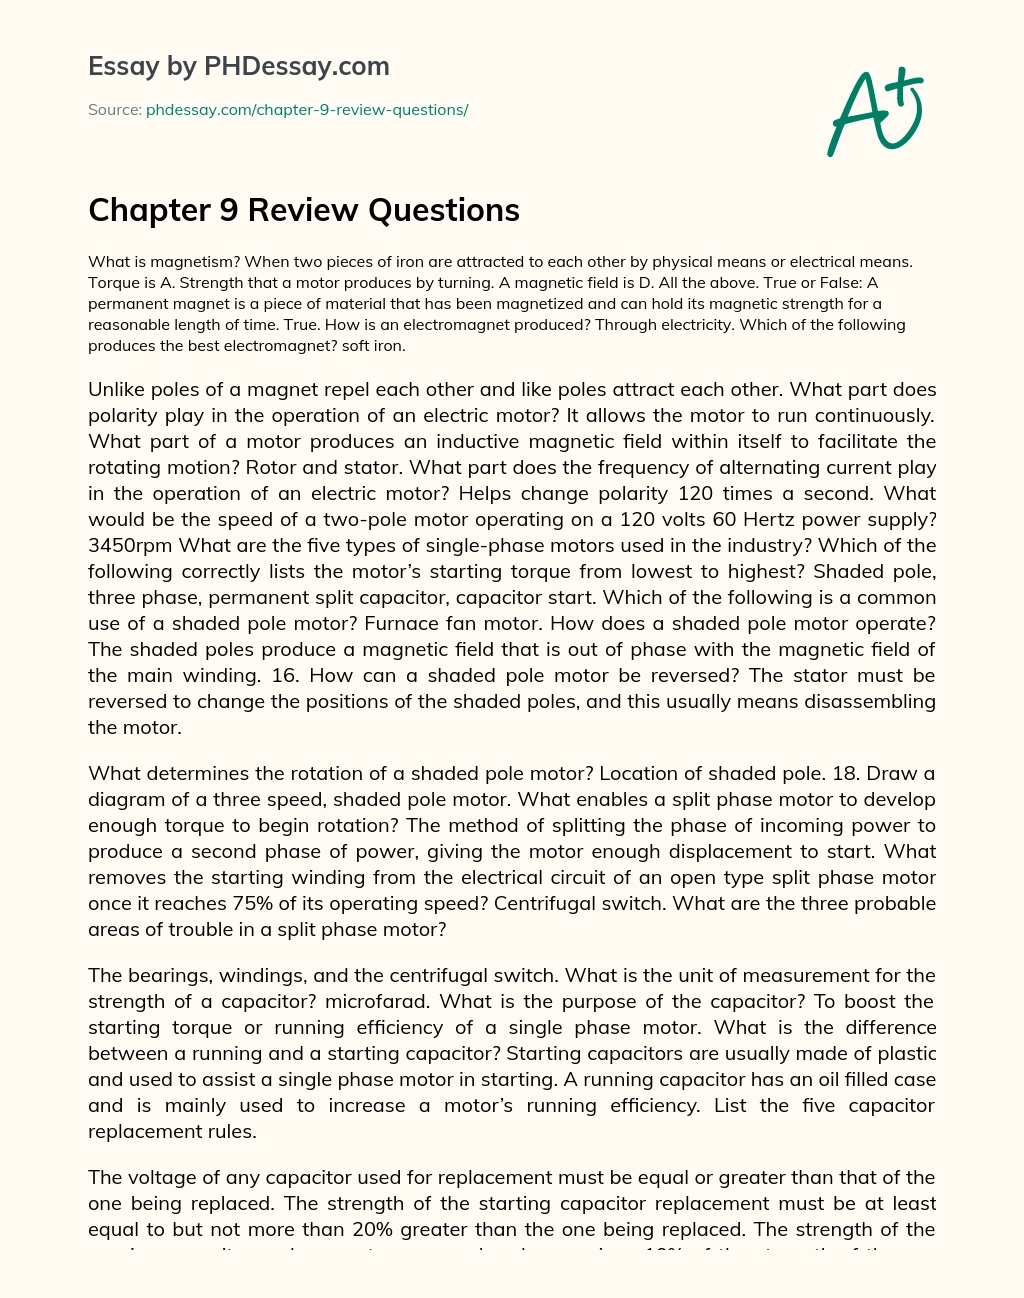 Chapter 9 Review Questions essay